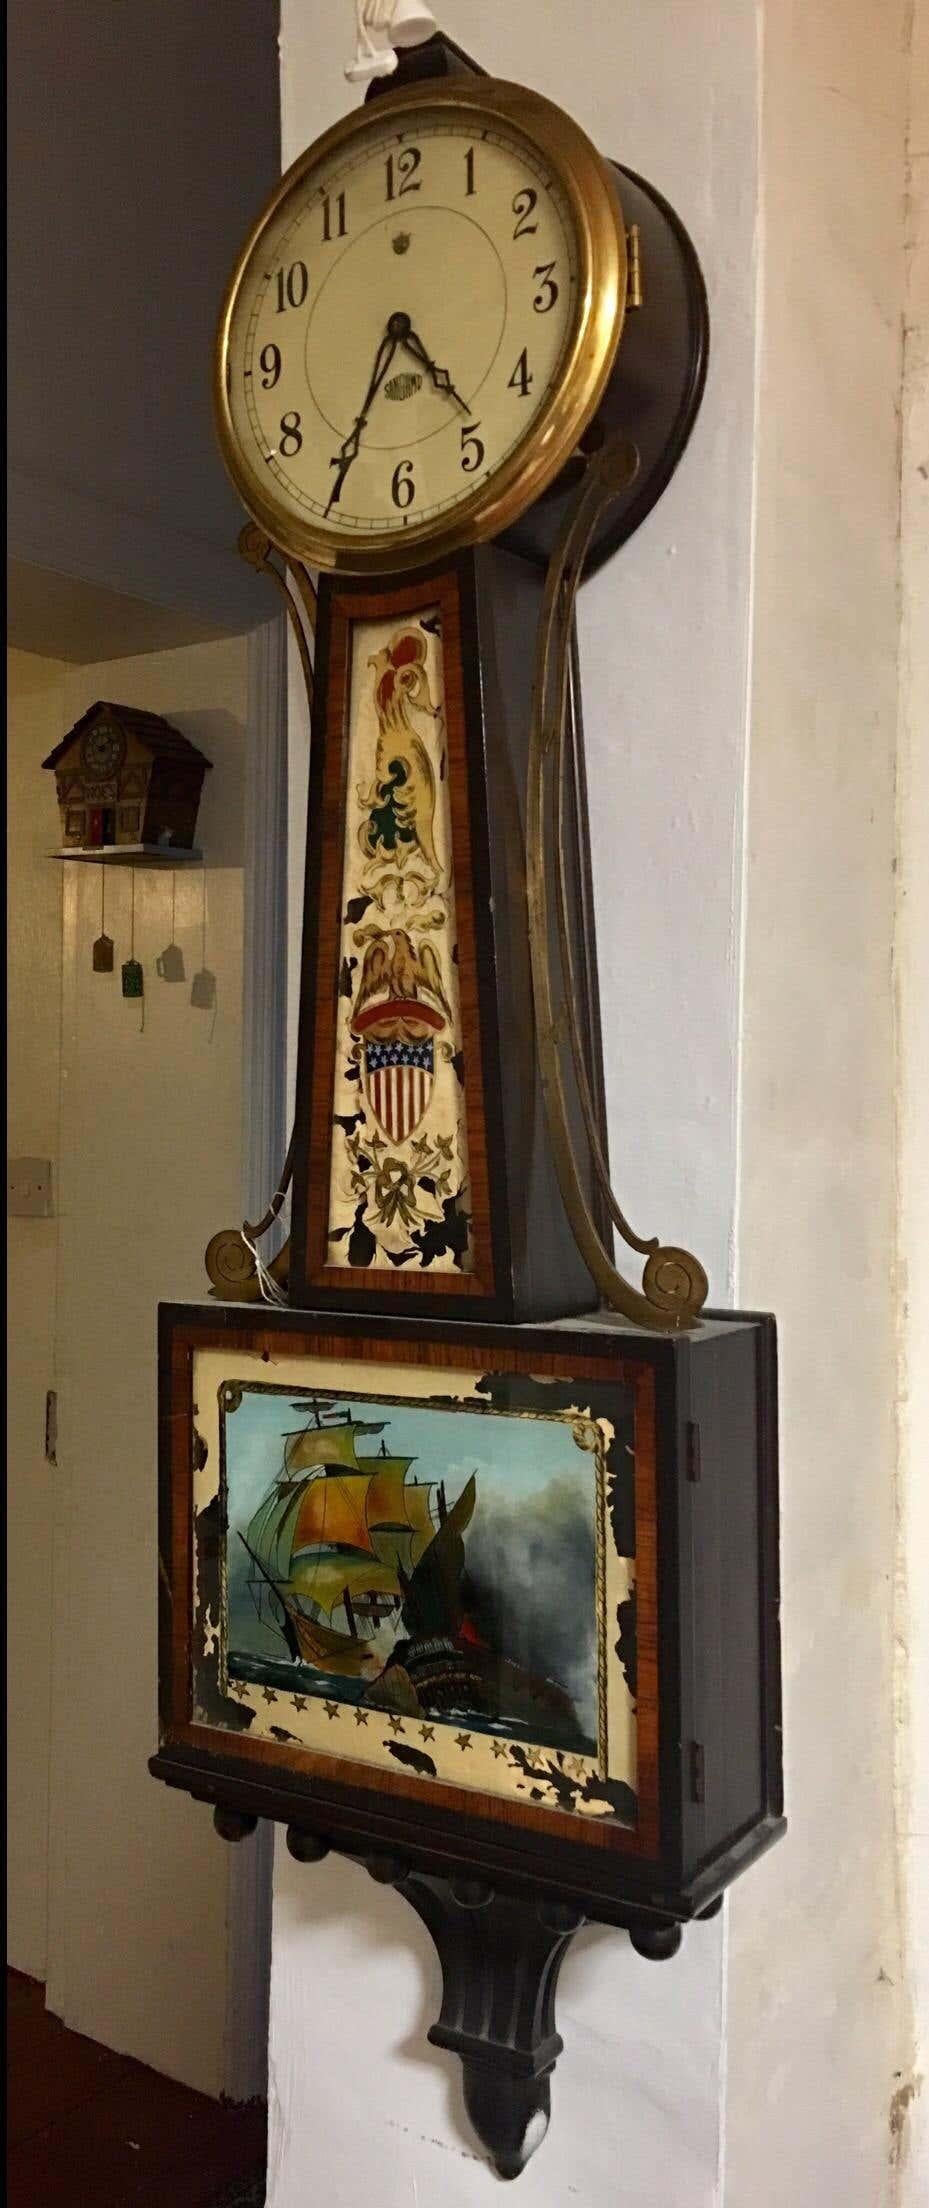 This clock is in good working order. Some parts of the hand painted glass panel are worn as shown on the photos. Please study the photos carefully as form part of the description.